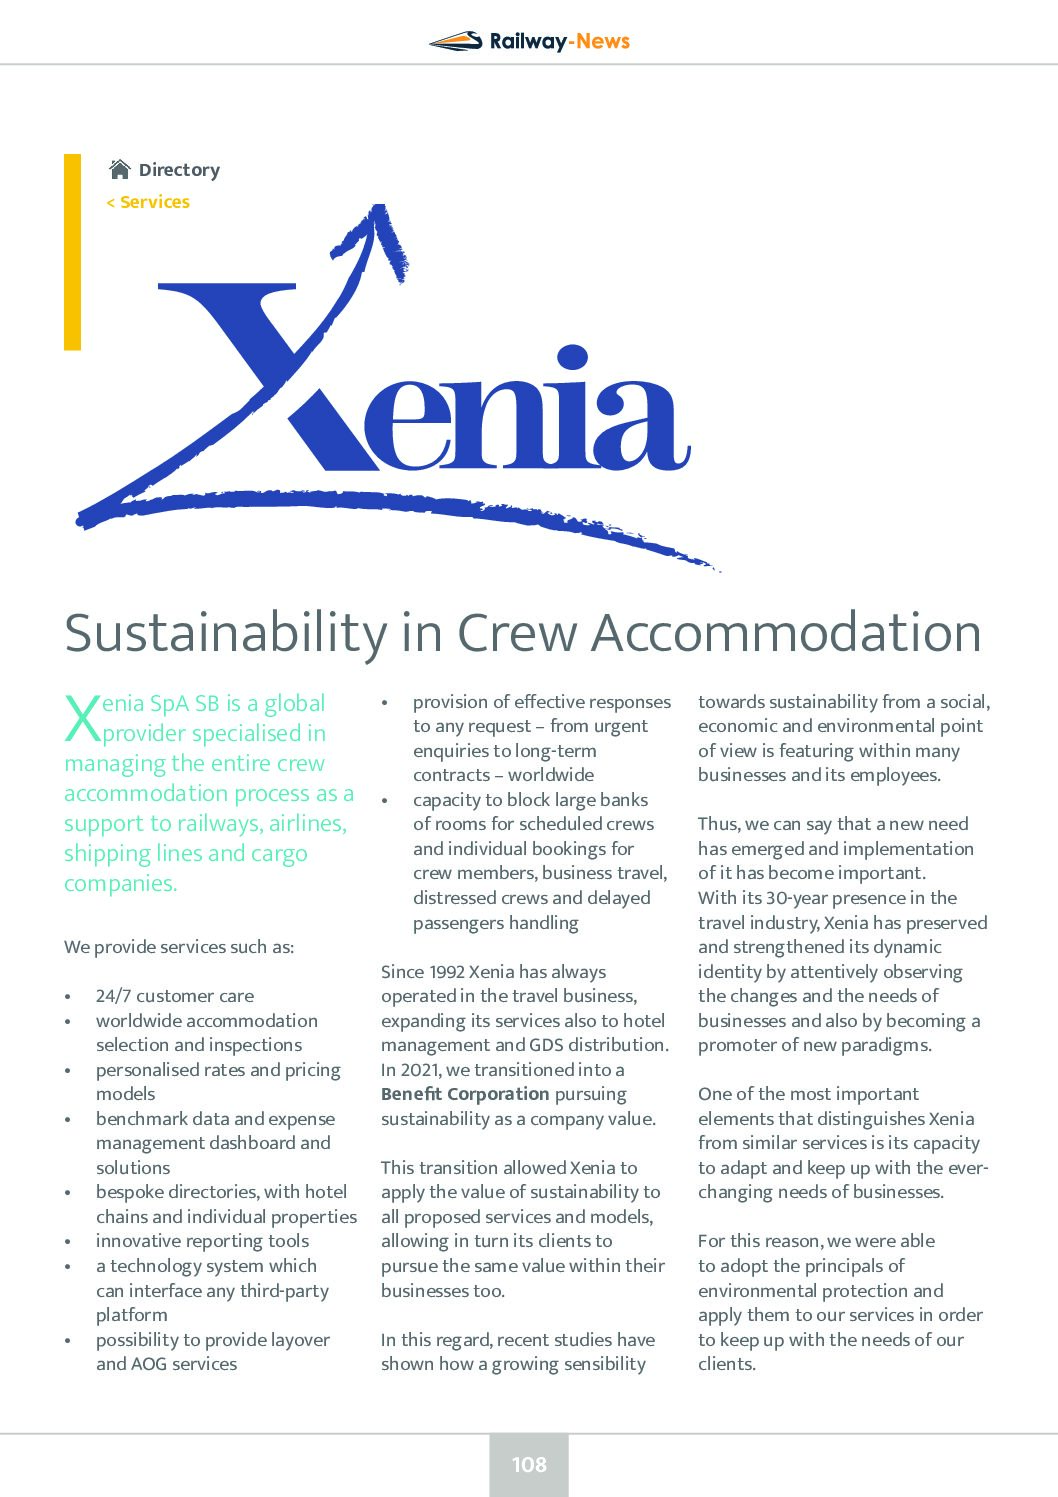 Sustainability in Crew Accommodation